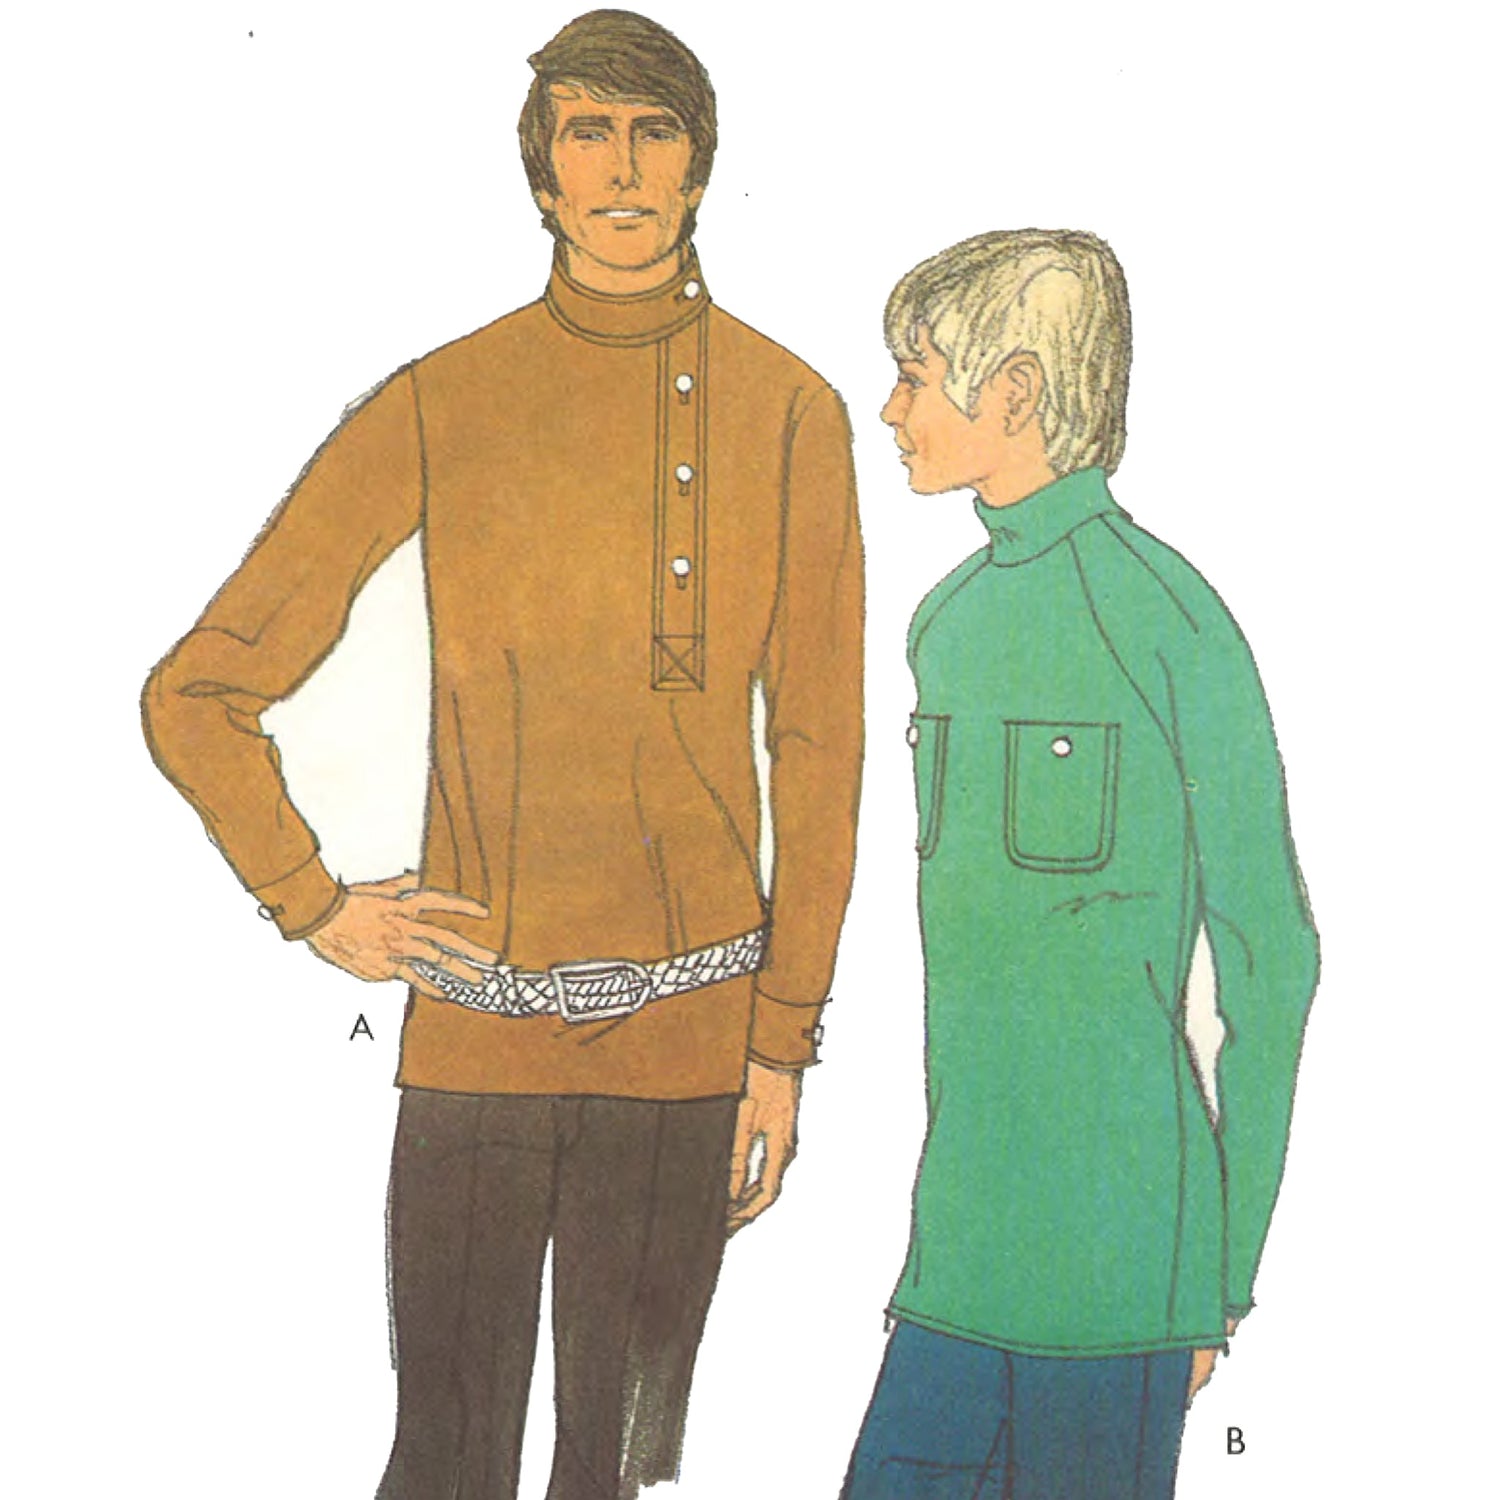 Men and boy wearing pull-over shirts made from sewing pattern Style 3343